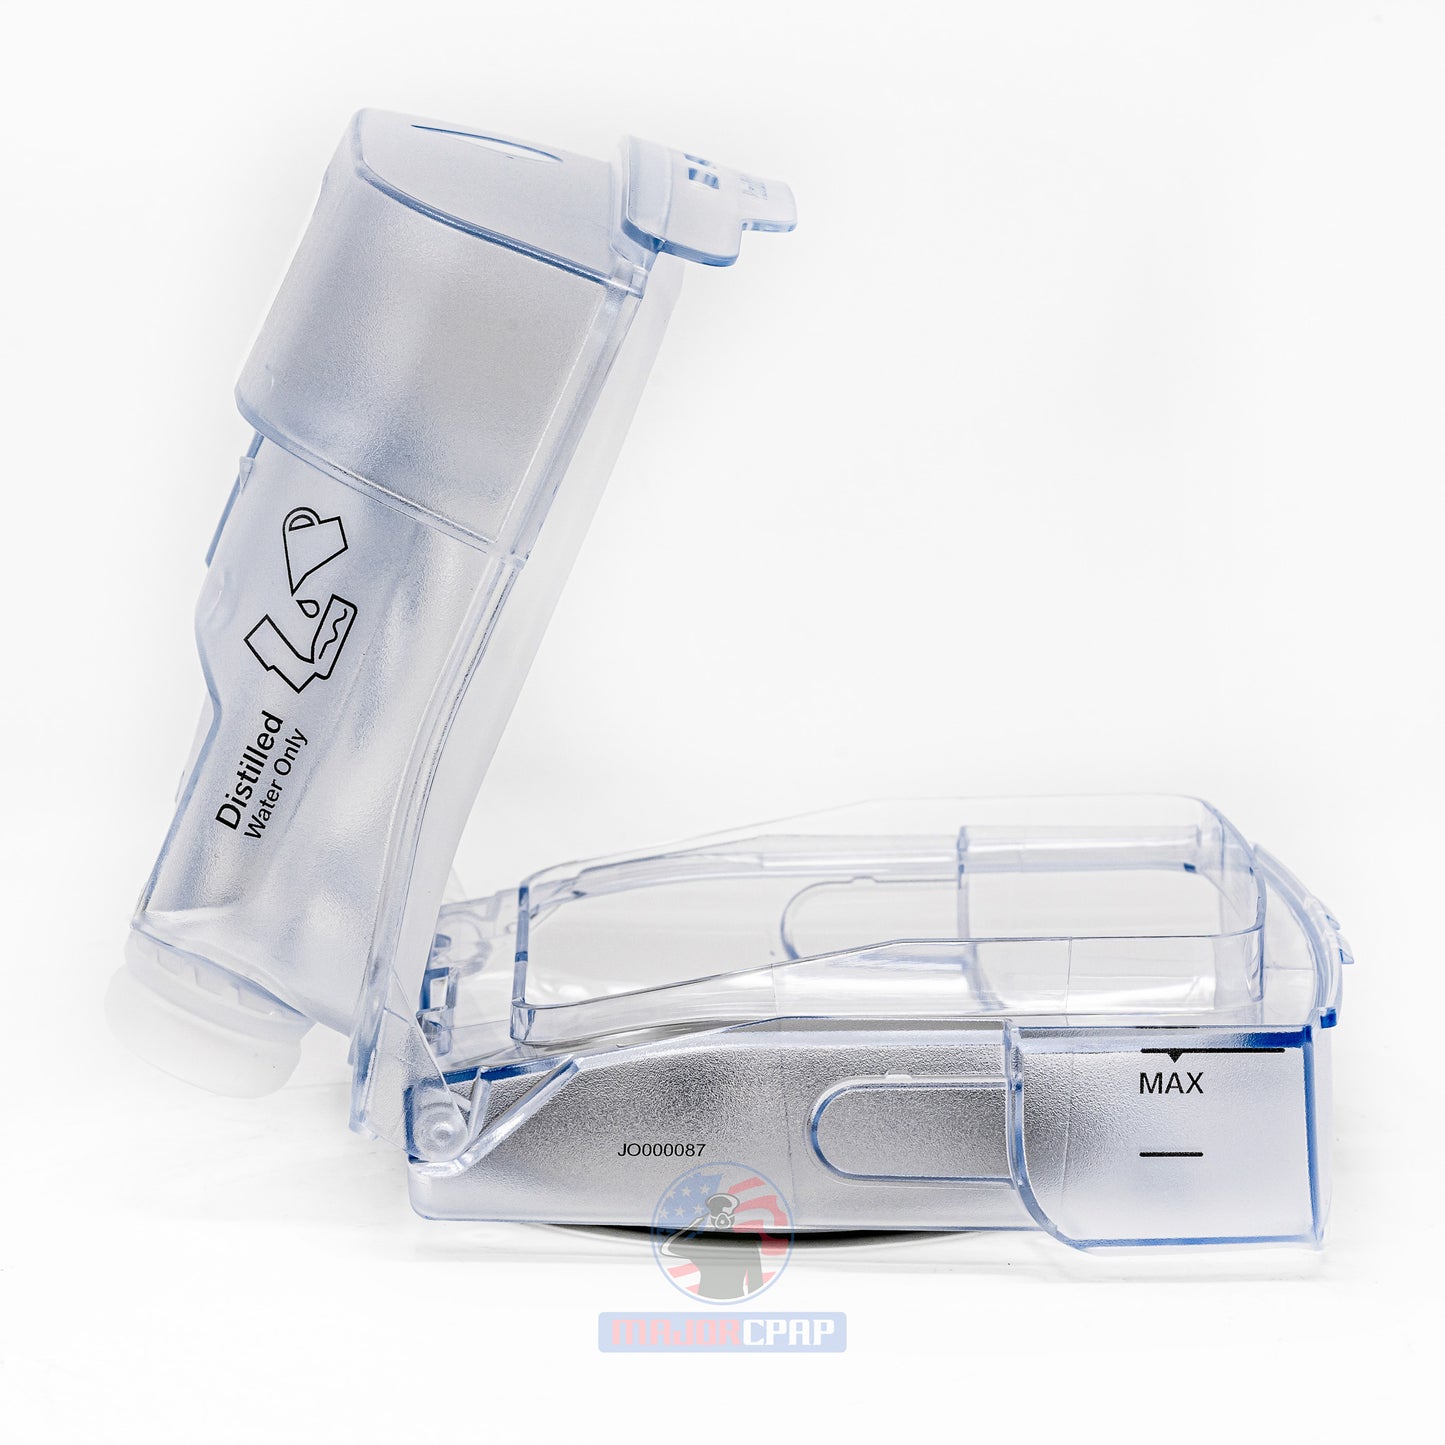 HumidAir 11 Standard CPAP Water Chamber for the AirSense 11 CPAP Machine